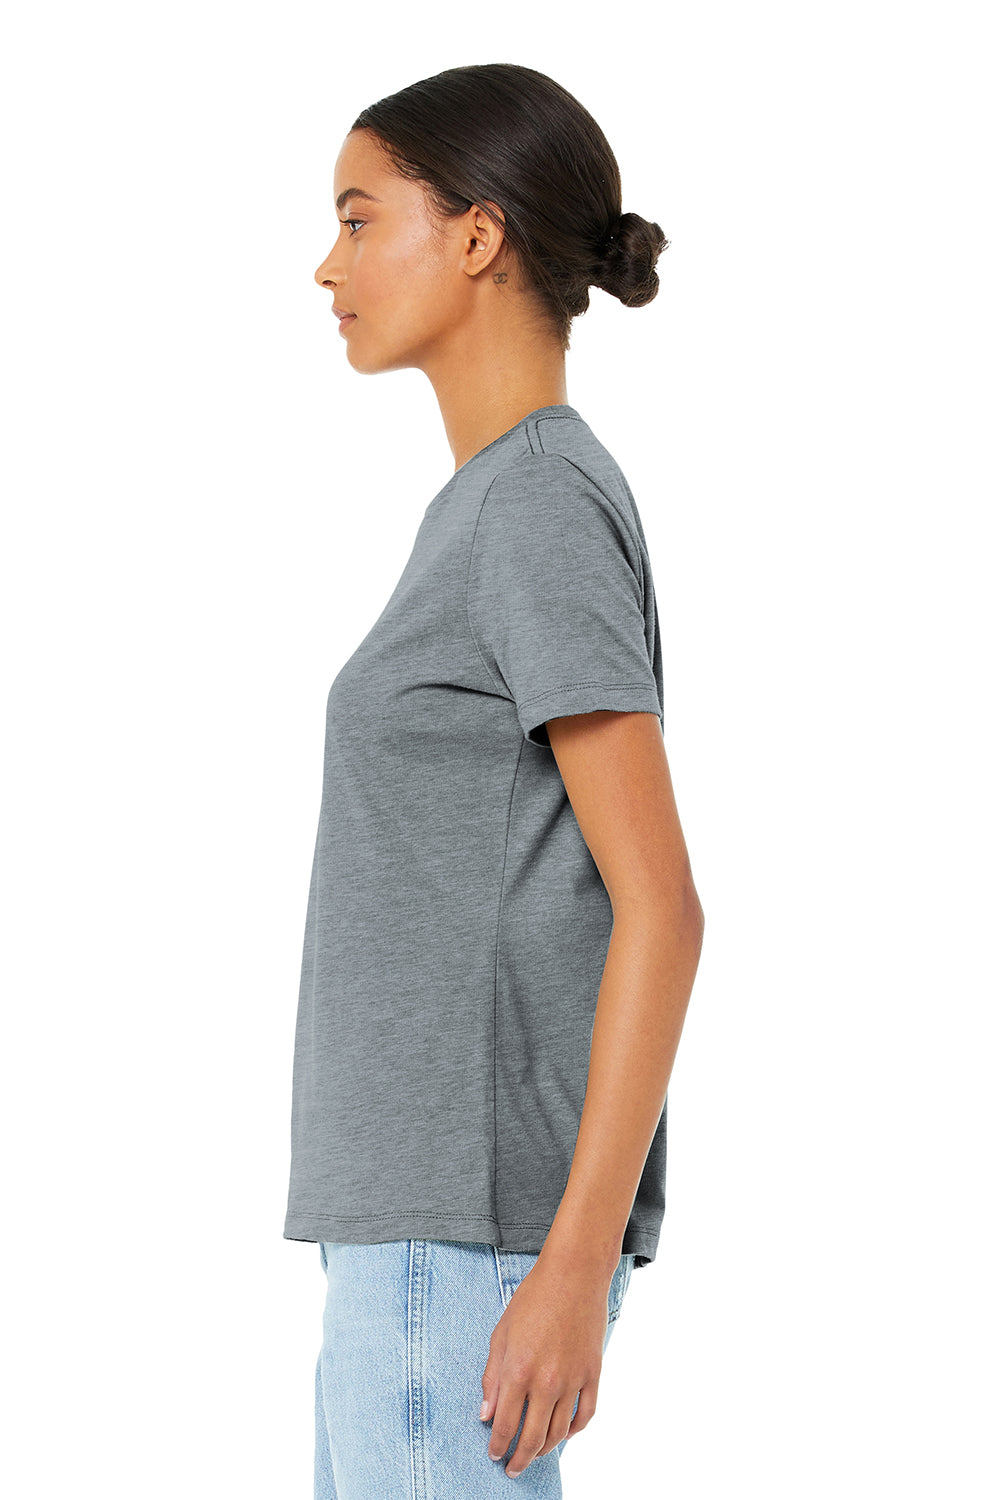 Bella + Canvas BC6400/B6400/6400 Womens Relaxed Jersey Short Sleeve Crewneck T-Shirt Athletic Grey Model Side